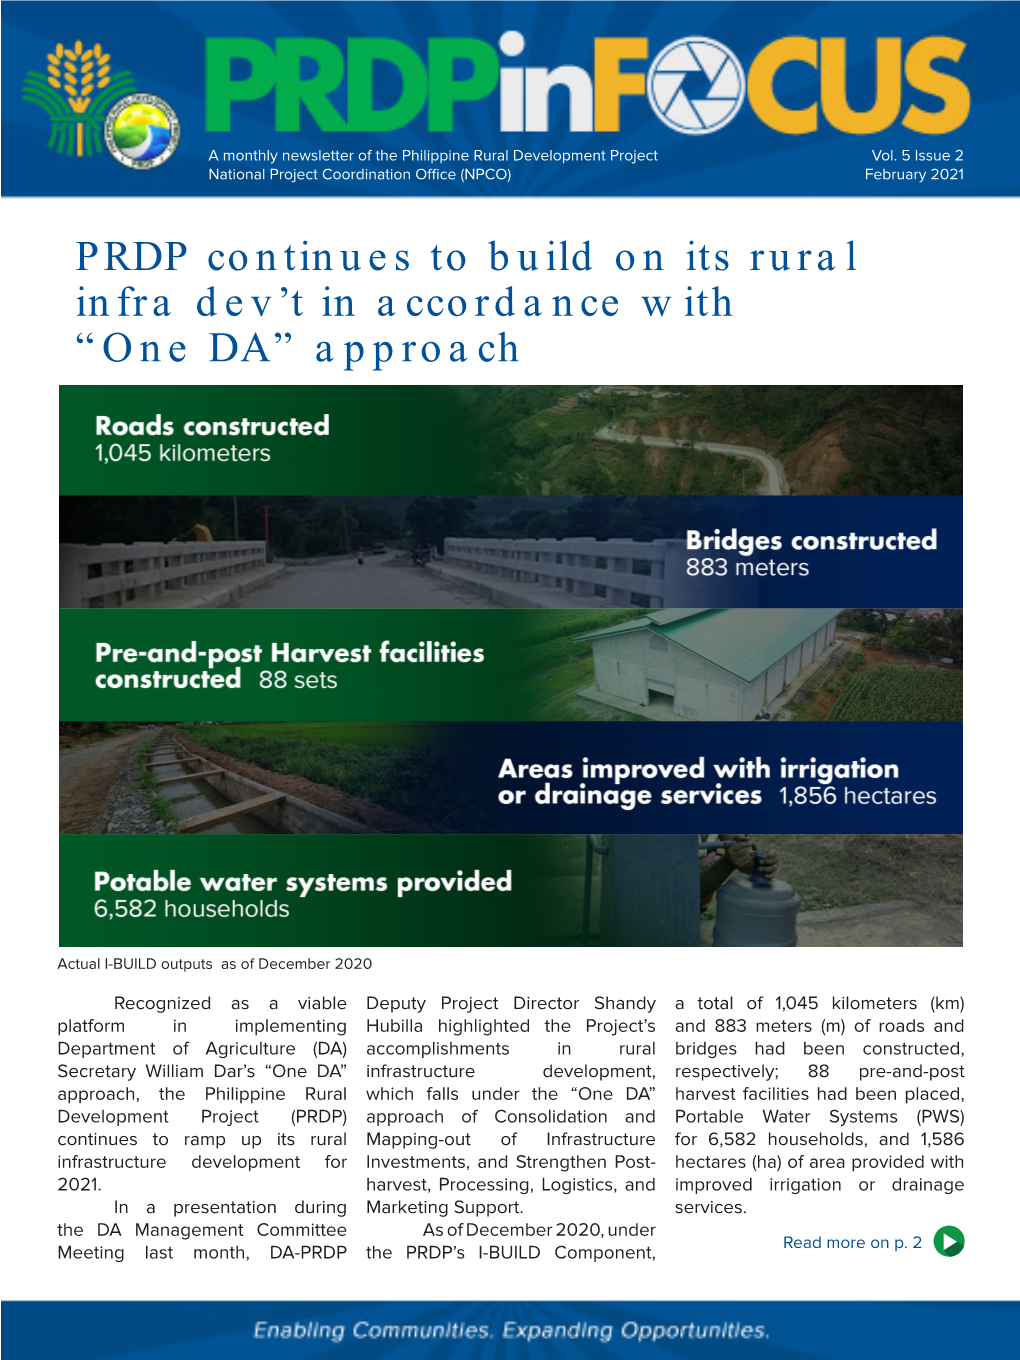 PRDP Continues to Build on Its Rural Infra Dev't in Accordance With